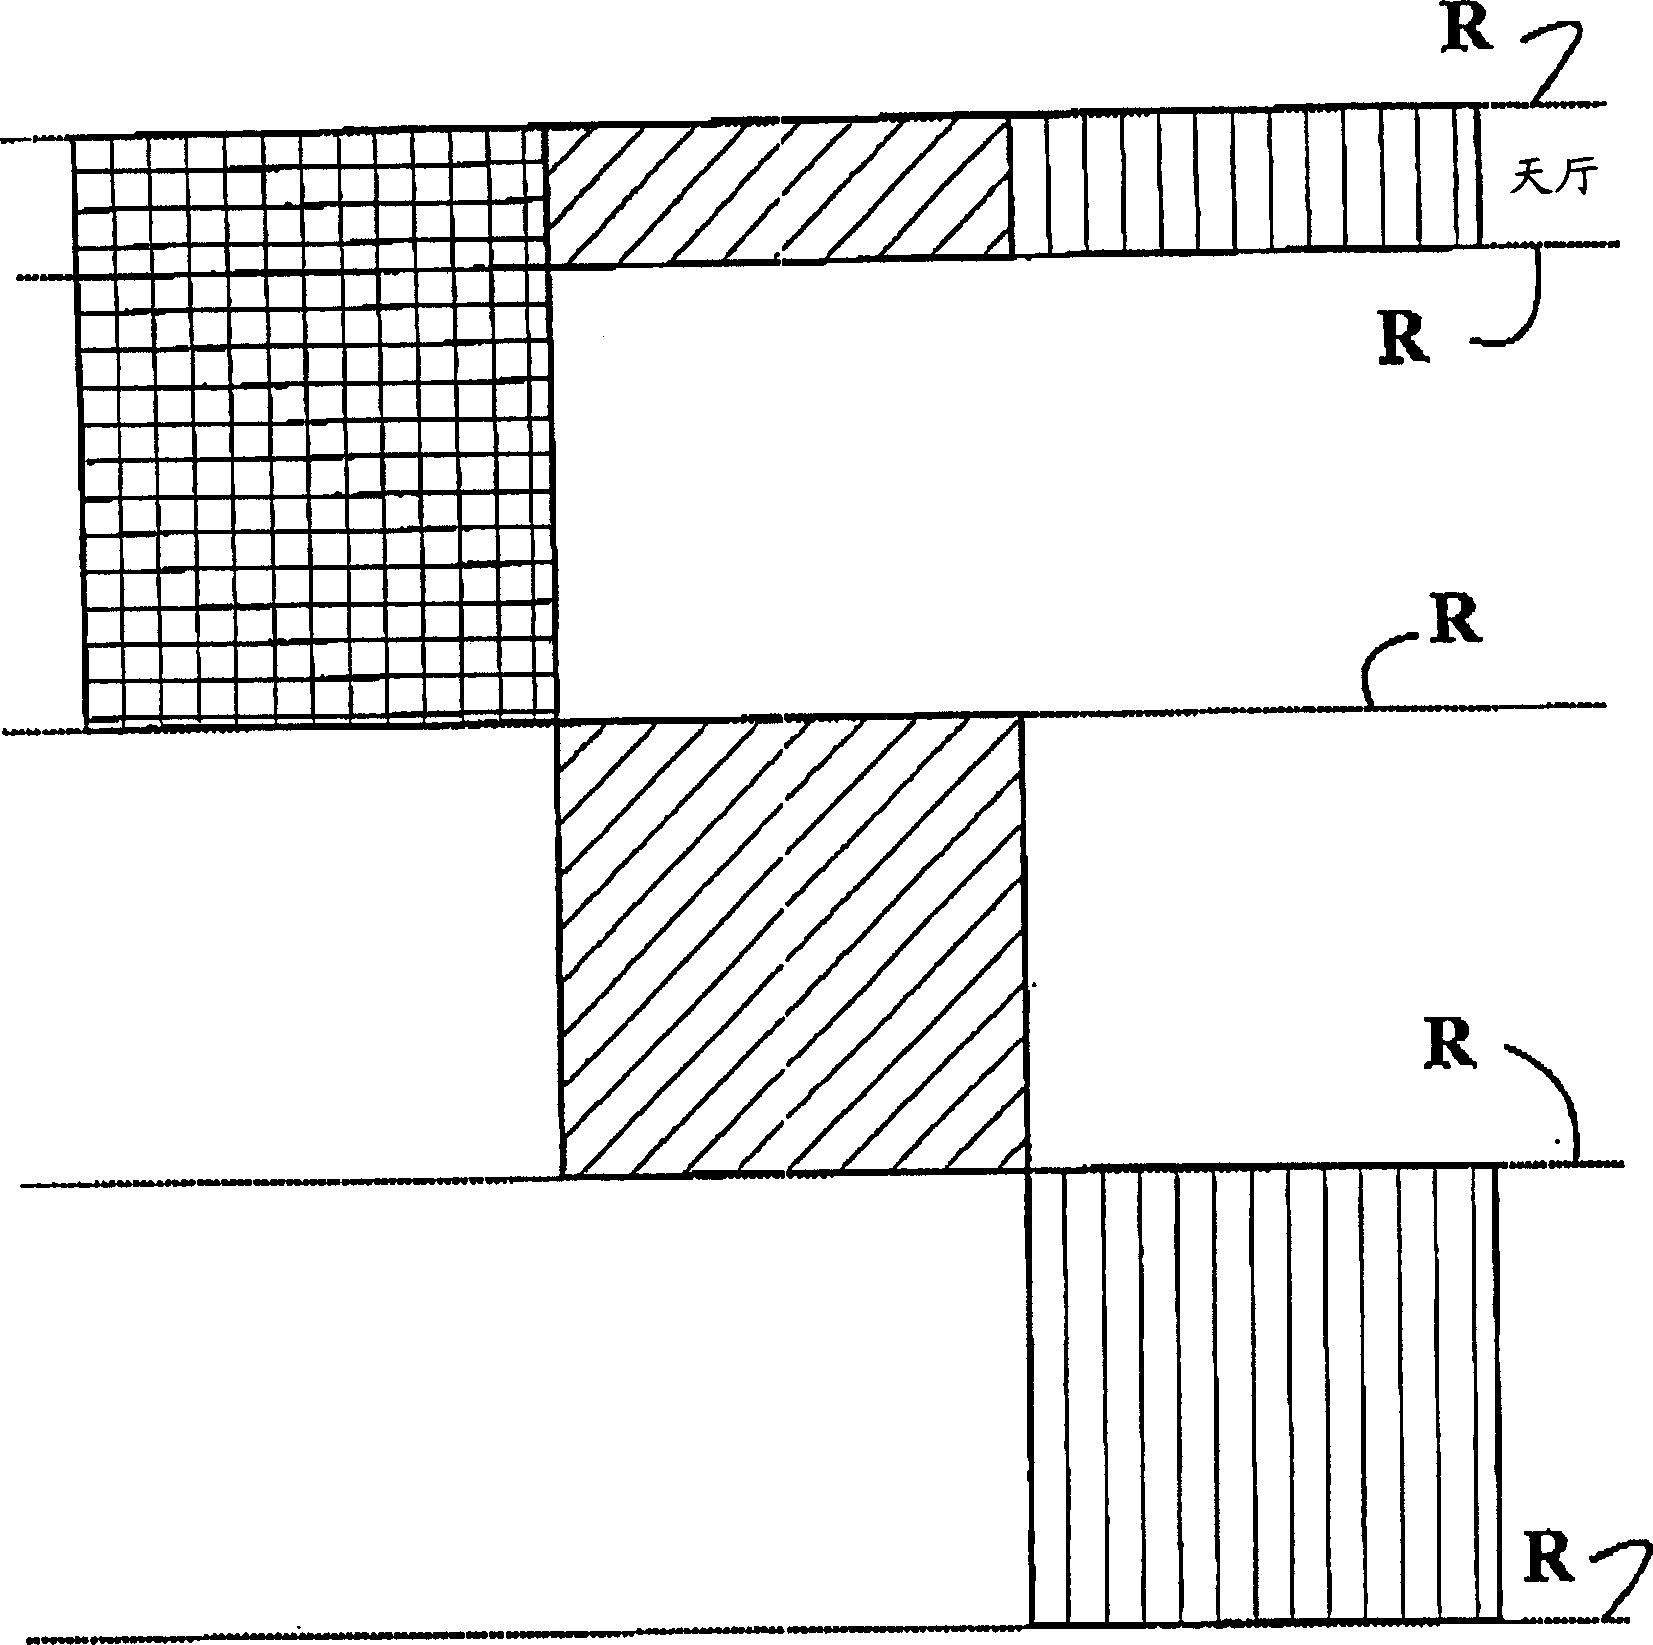 Method for controlling the elevators in an elevator bank